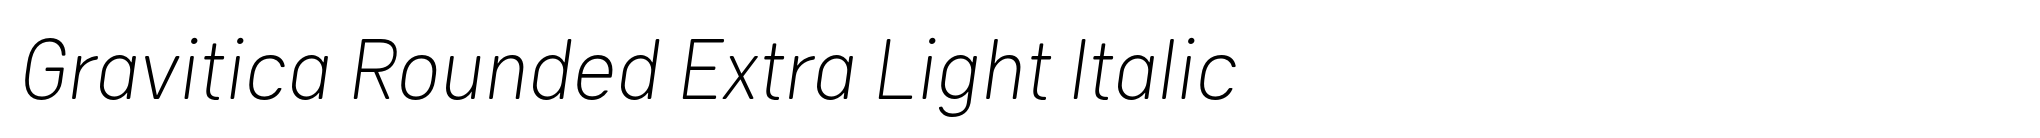 Gravitica Rounded Extra Light Italic image